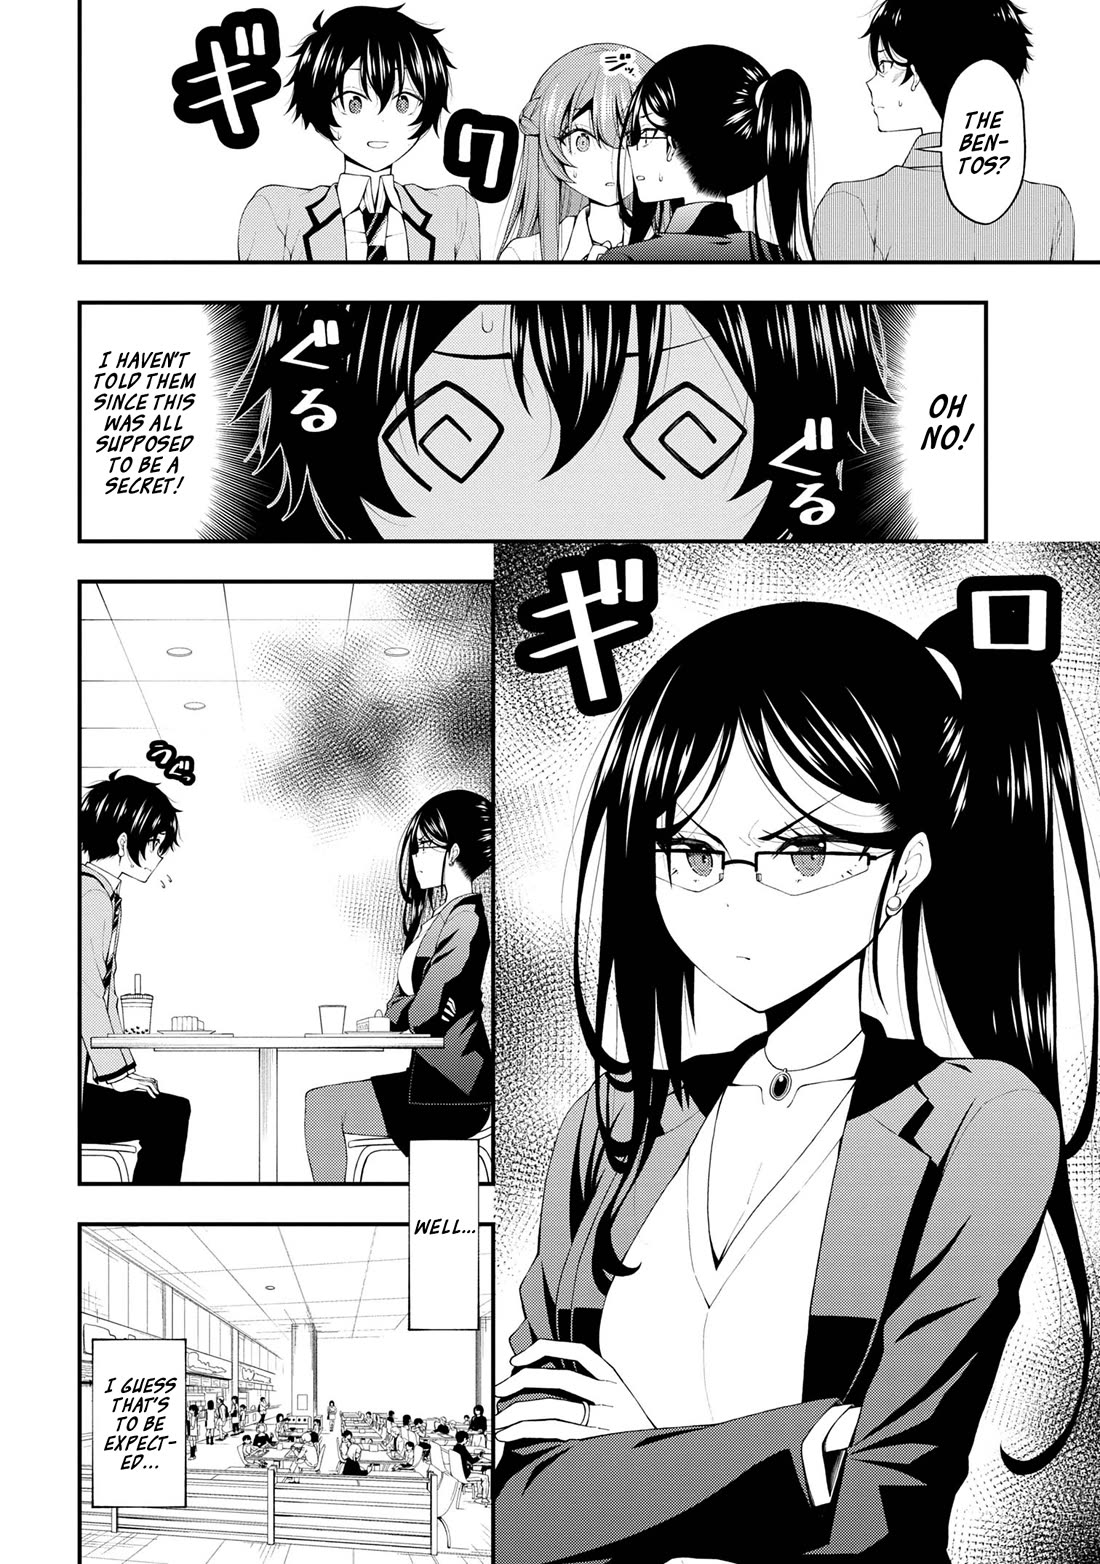 The Gal Who Was Meant to Confess to Me as a Game Punishment - chapter 15 - #6